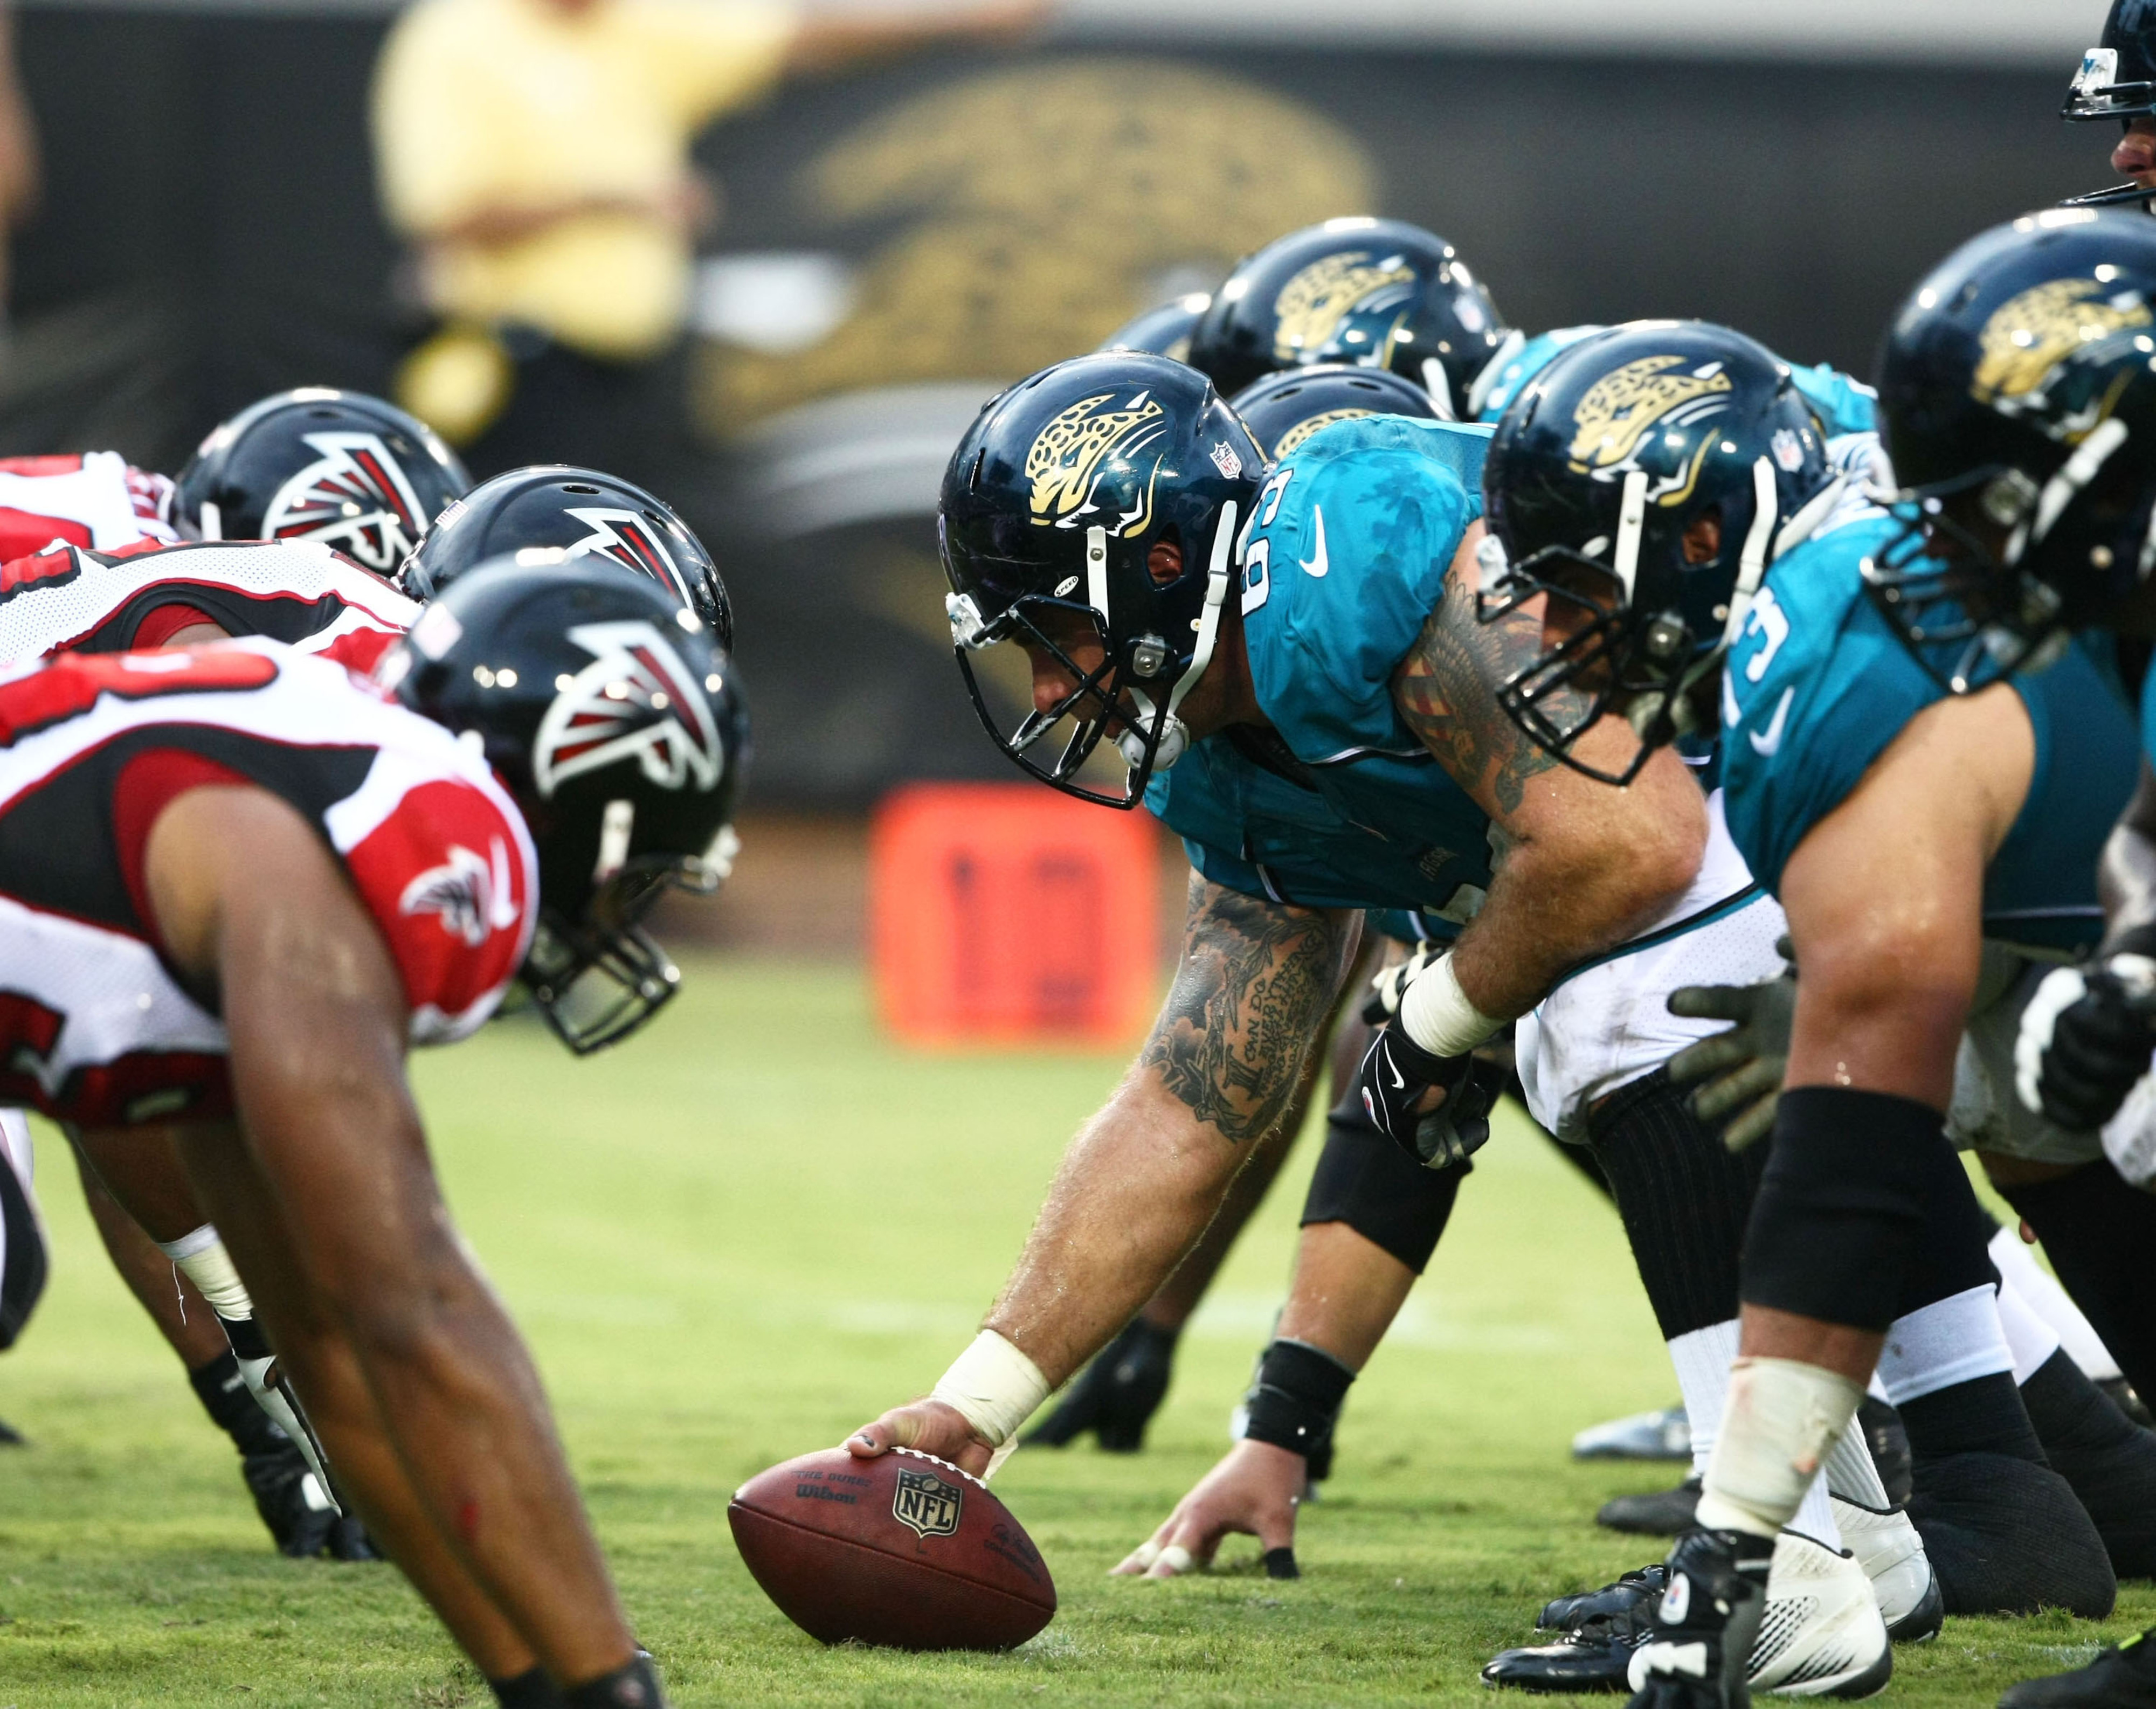 Aug 30, 2012; Jacksonville FL, USA; The Atlanta Falcons and the Jacksonville Jaguars face off at the line during the second quarter at EverBank Field. Mandatory Credit: Douglas Jones-US PRESSWIRE